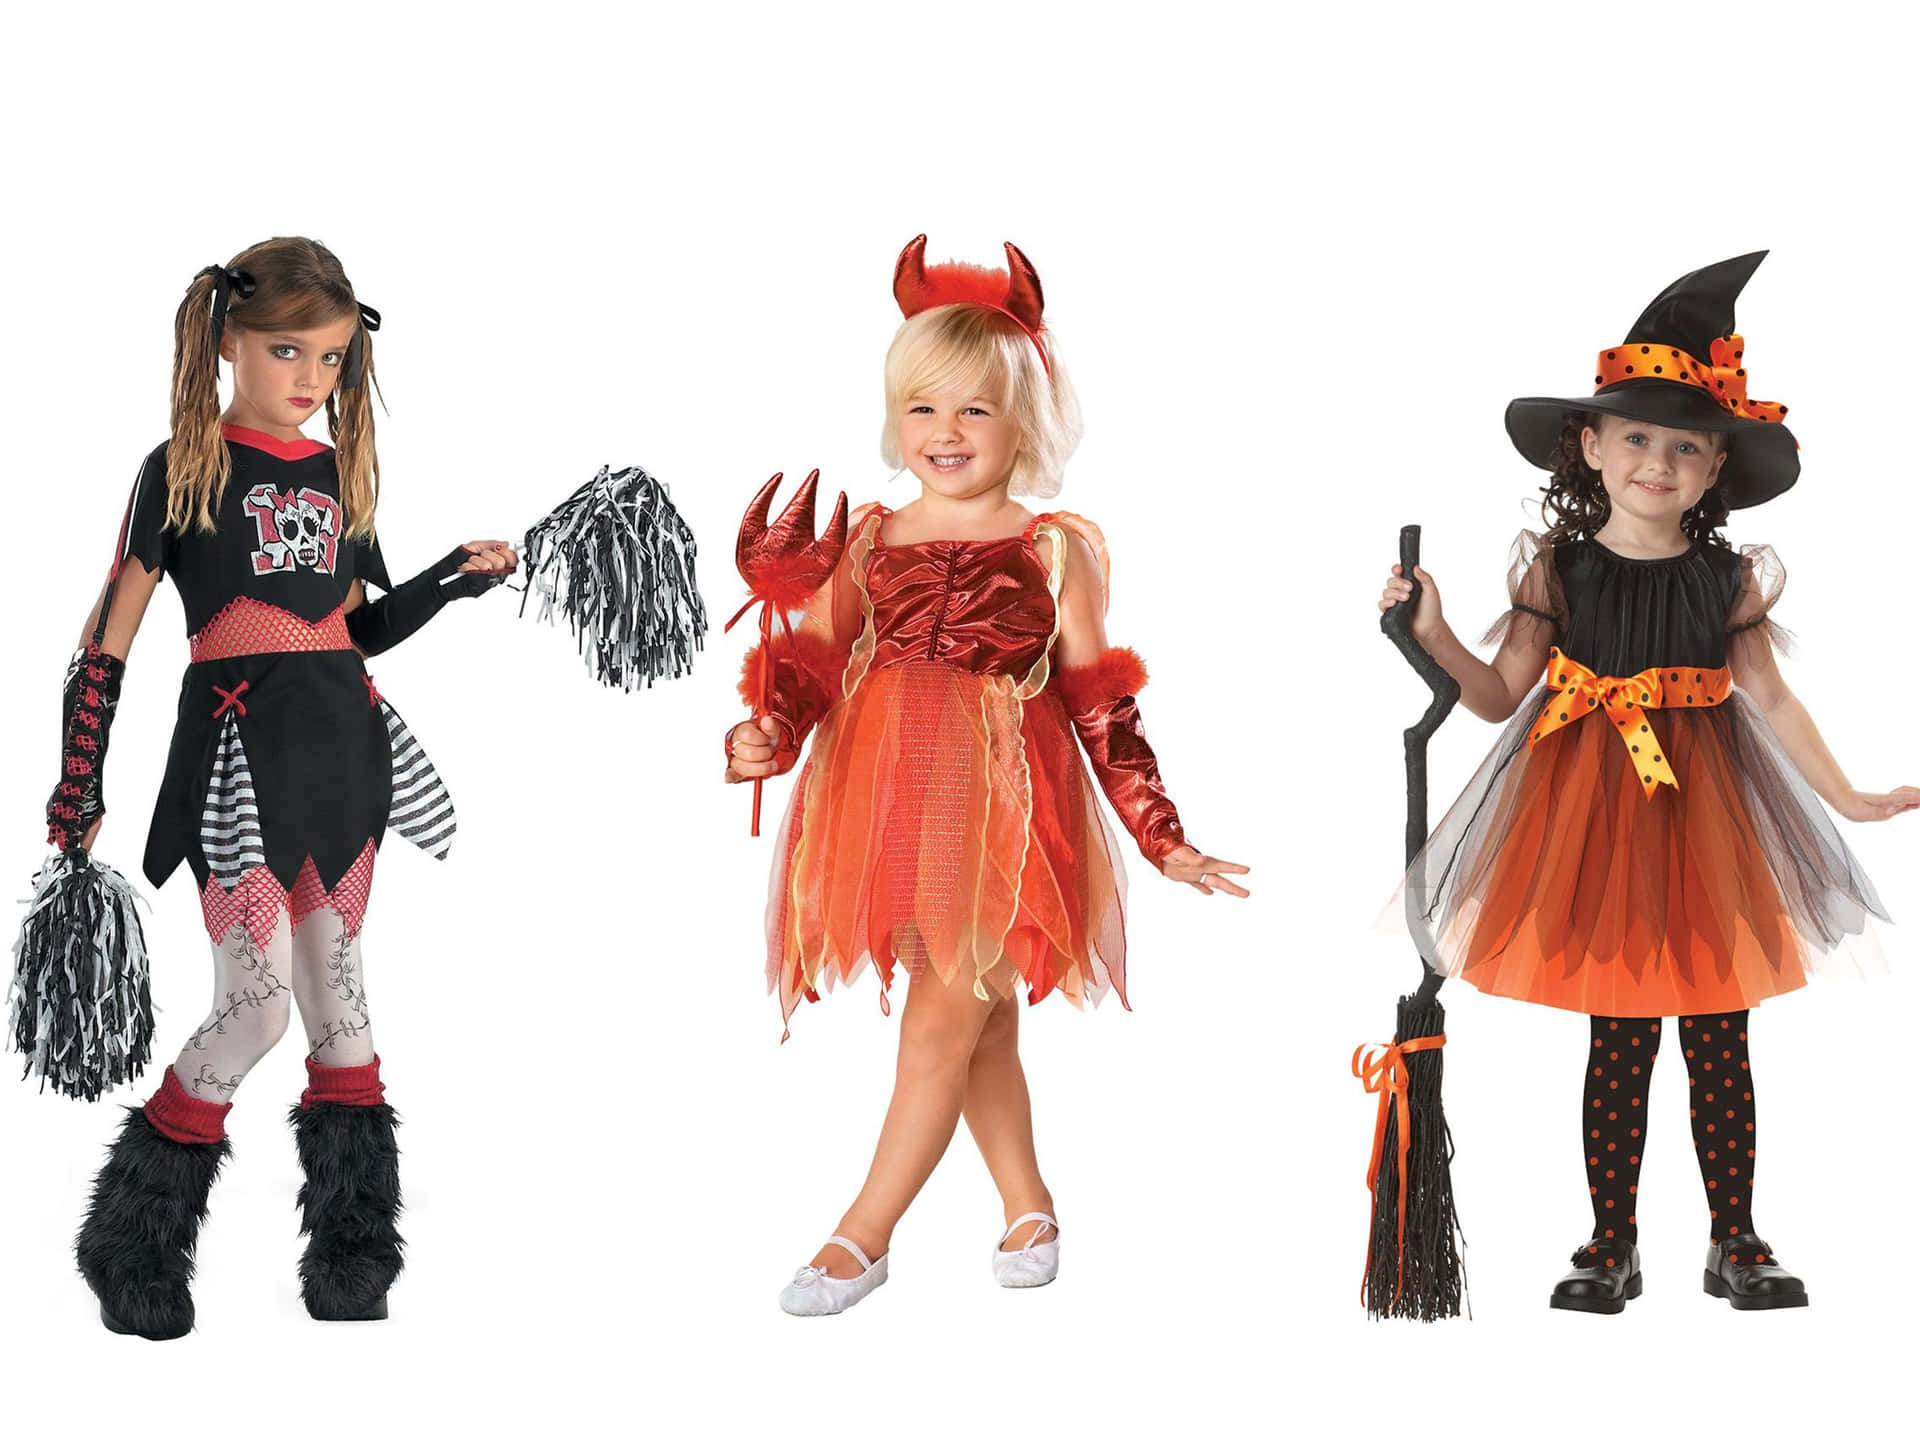 Show Off Your Halloween Spirit in Style with a Spooky Costume!